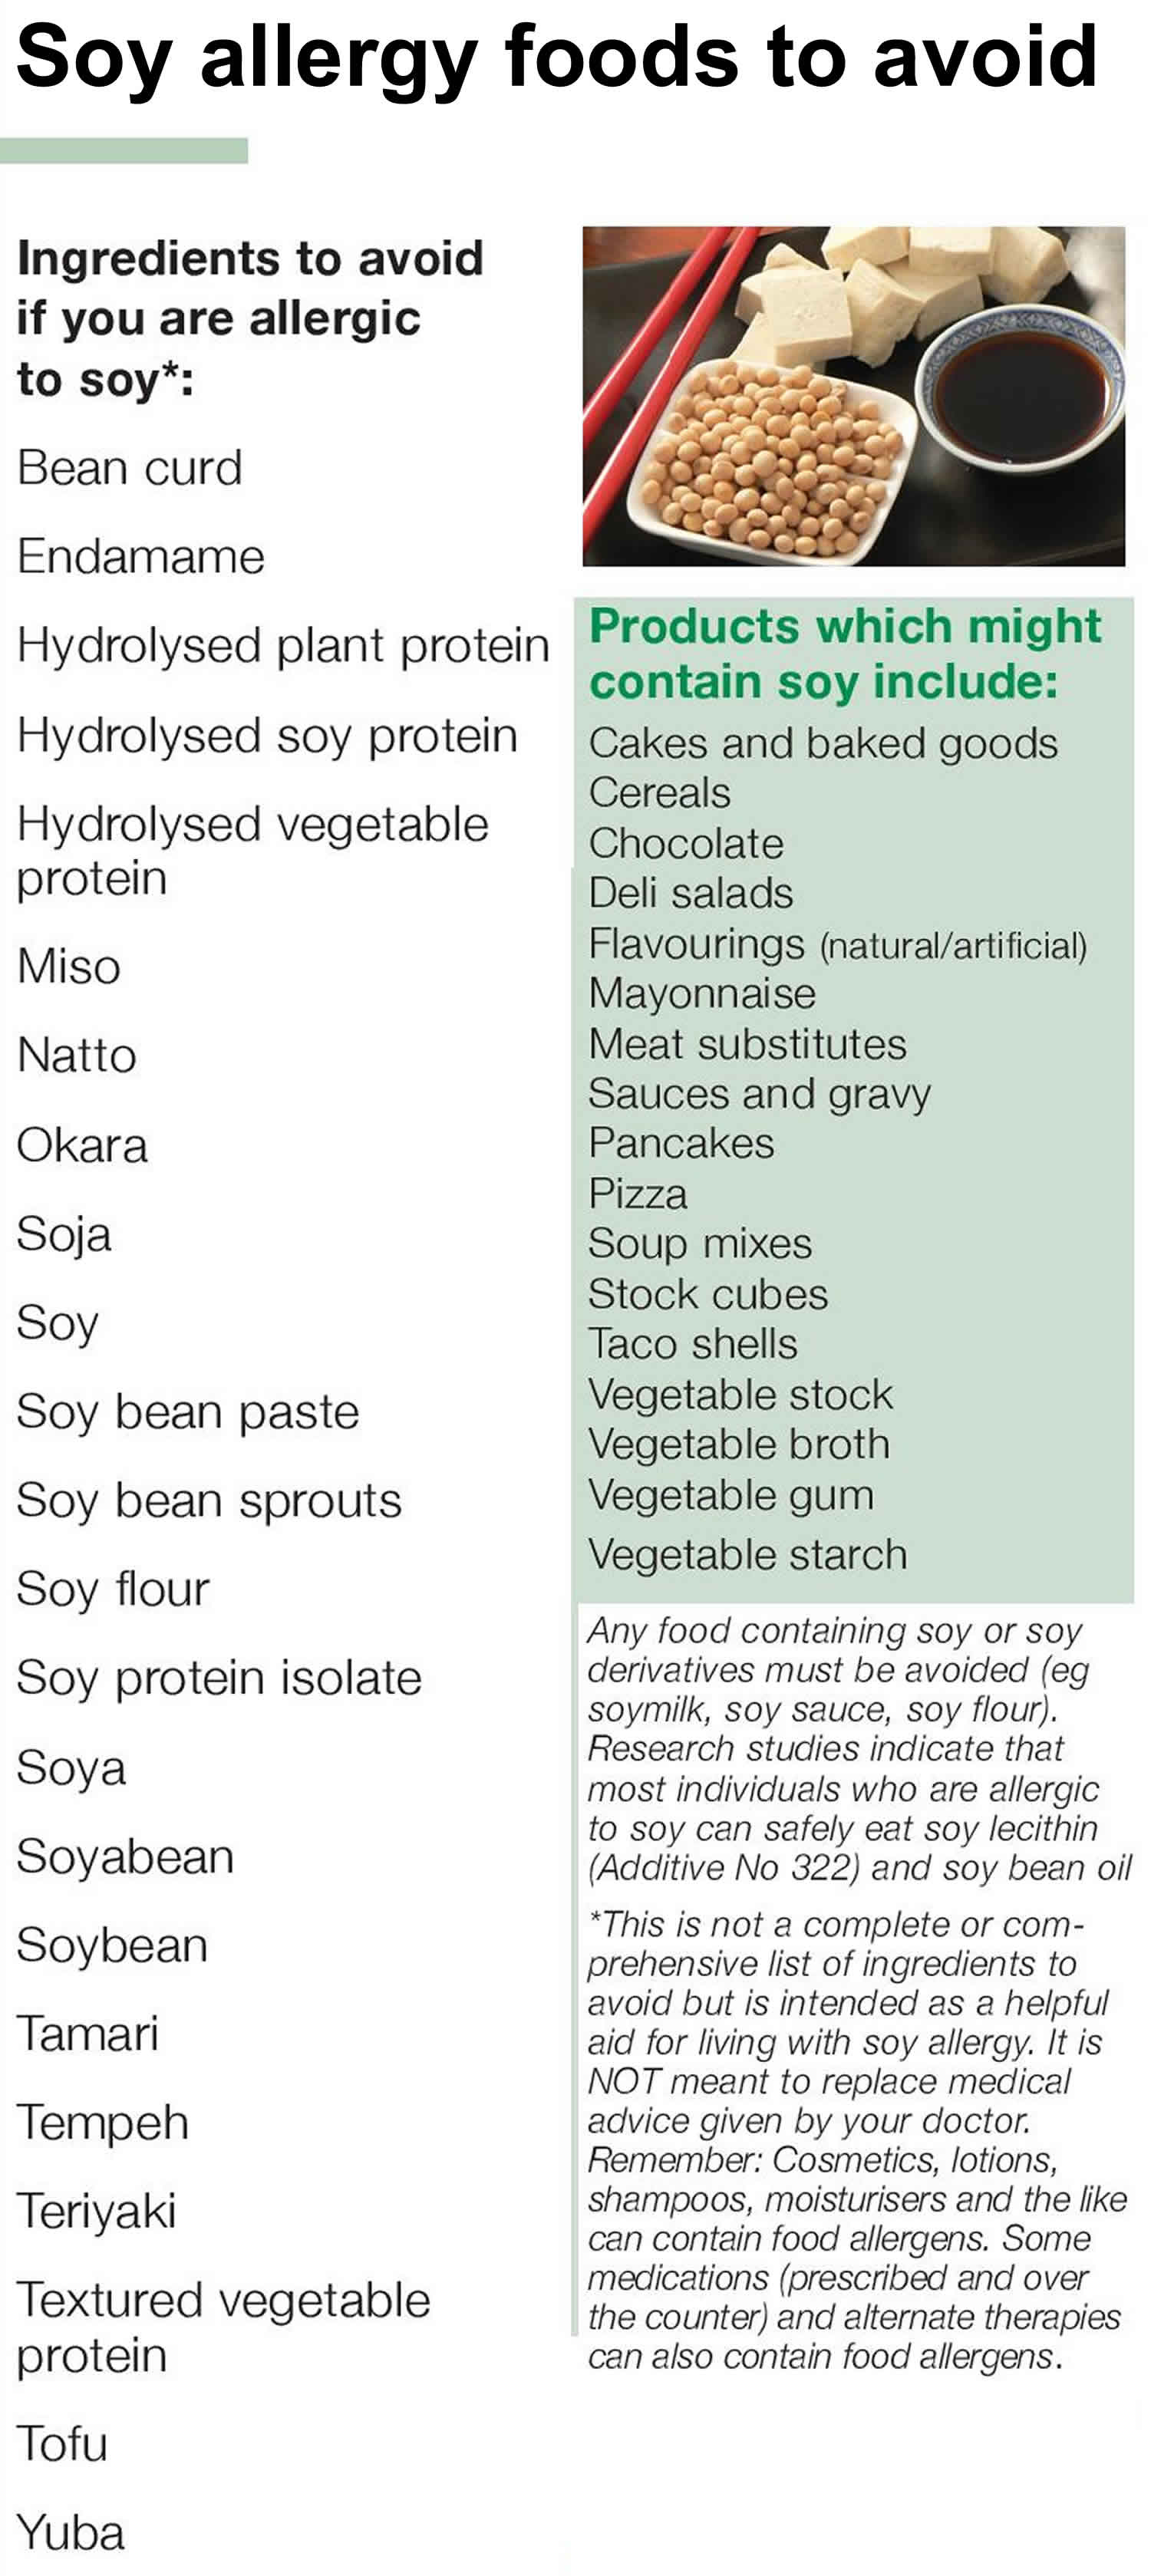 Sensitive to Soy? Here's How to Determine If You Have a Soy Allergy